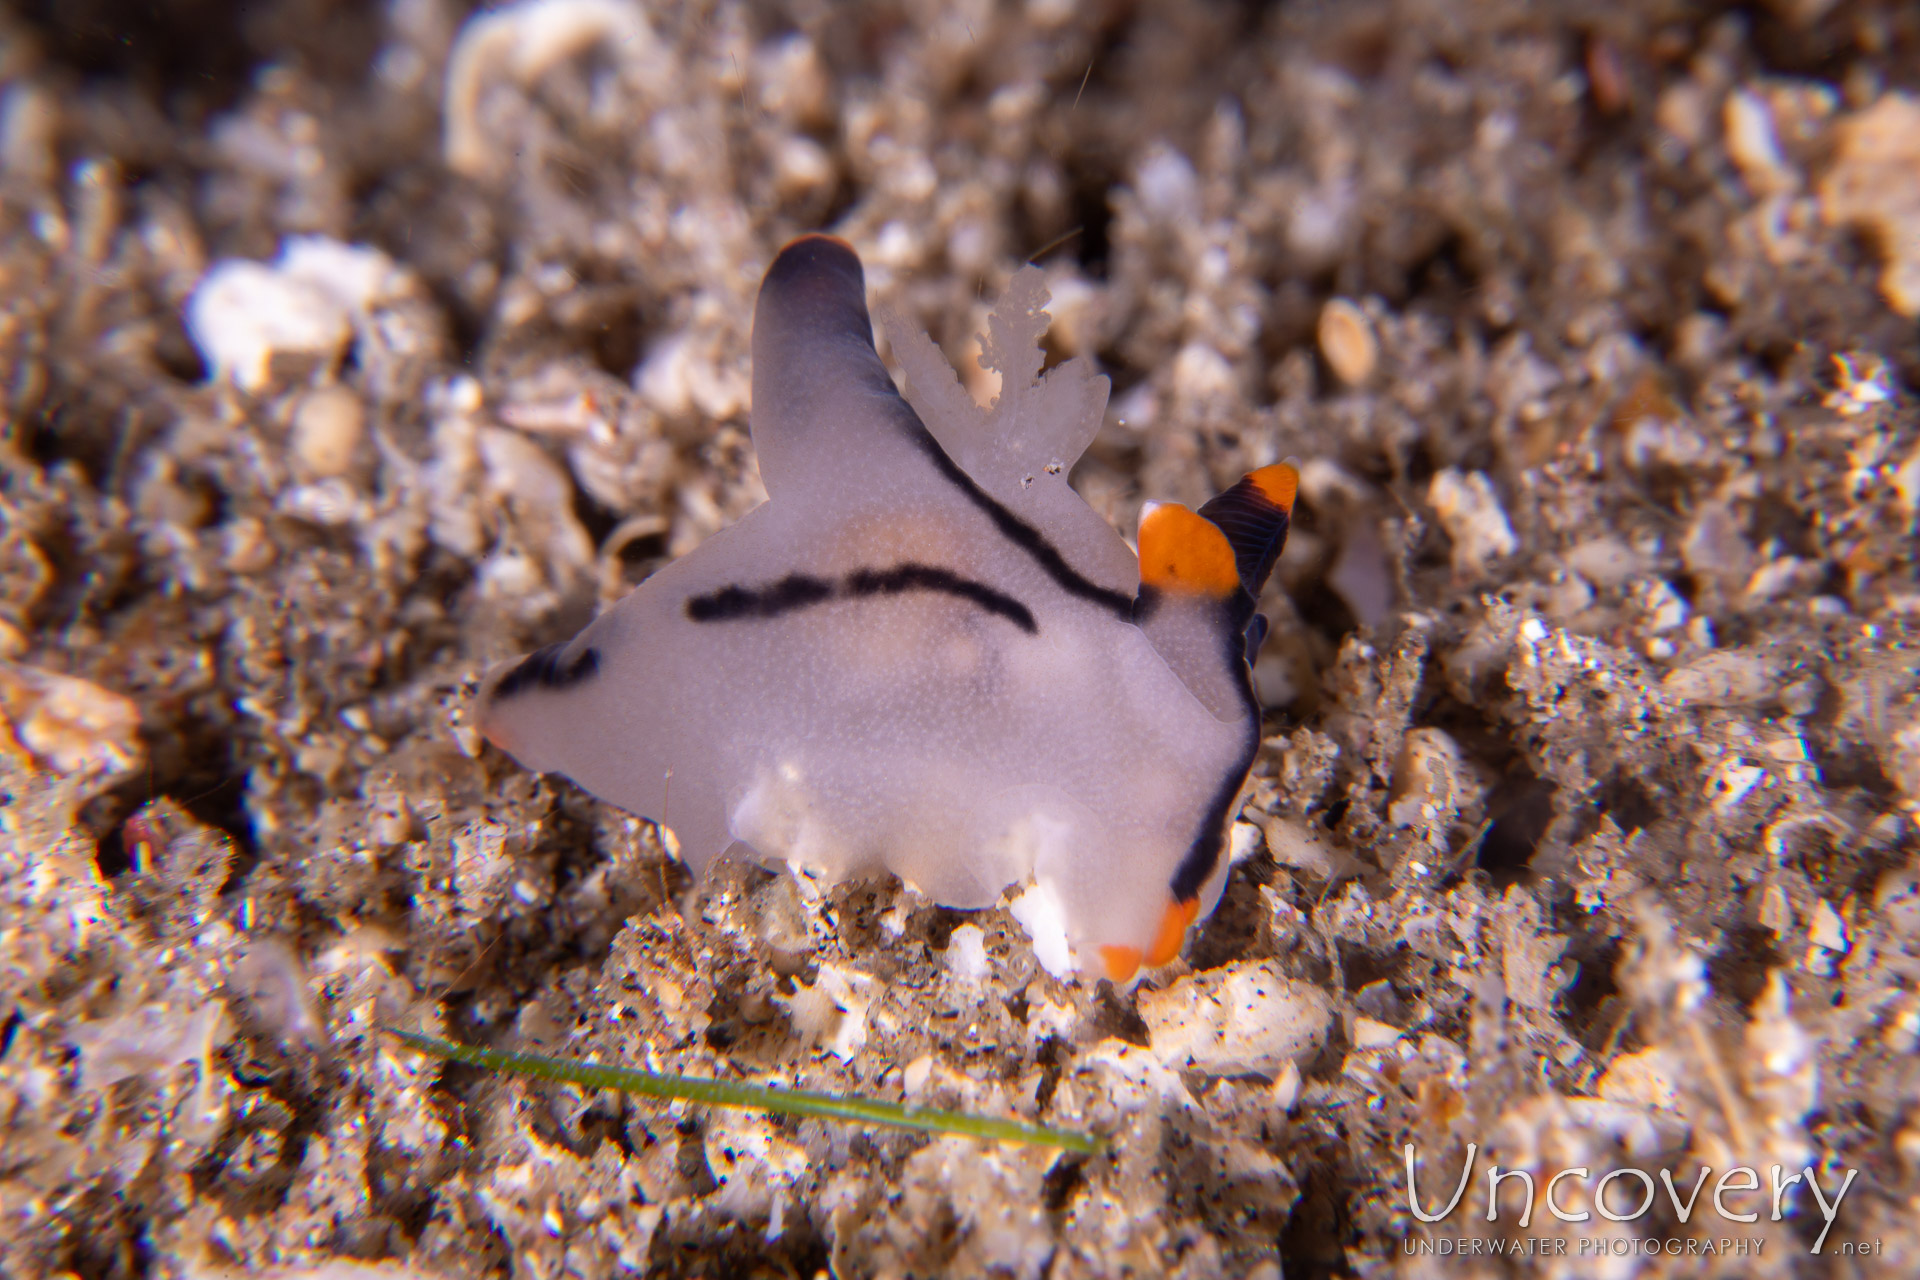 Nudibranch (thecacera Picta), photo taken in Philippines, Negros Oriental, Dauin, n/a